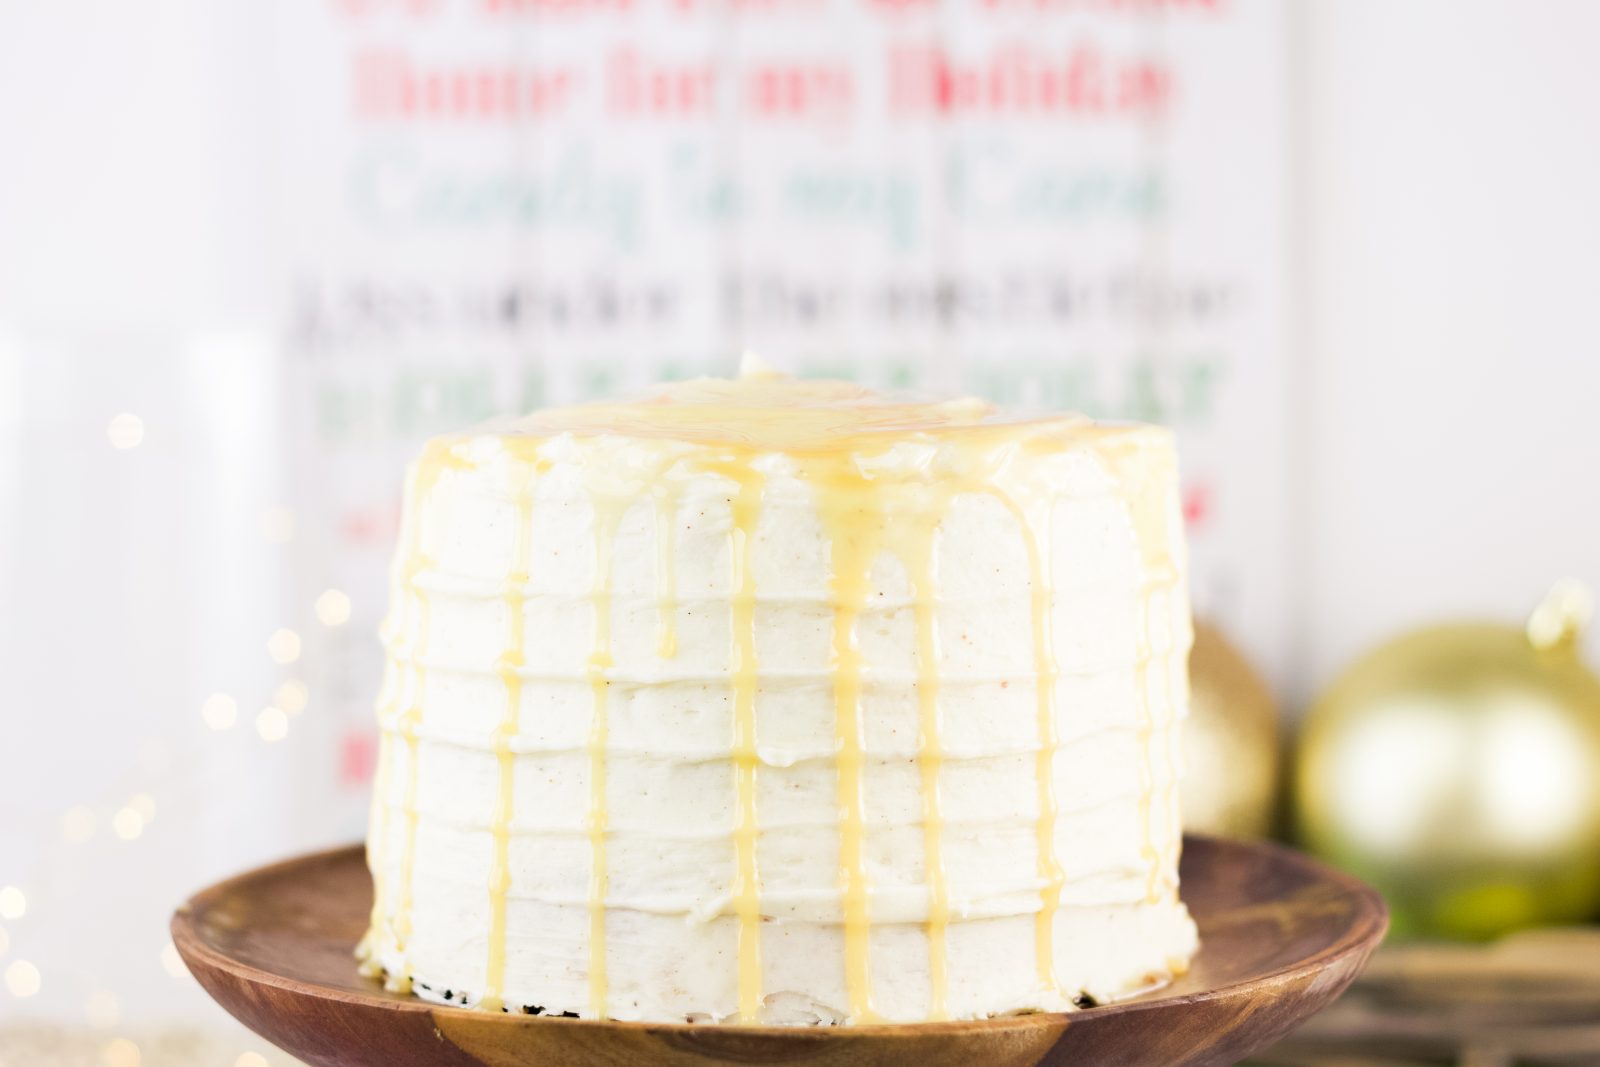 This eggnog cake recipe is everything you need to get into the holiday spirit! Topped with a rum simple syrup and cream cheese frosting, it's a must try! Find the recipe on www.Embellishmints.com